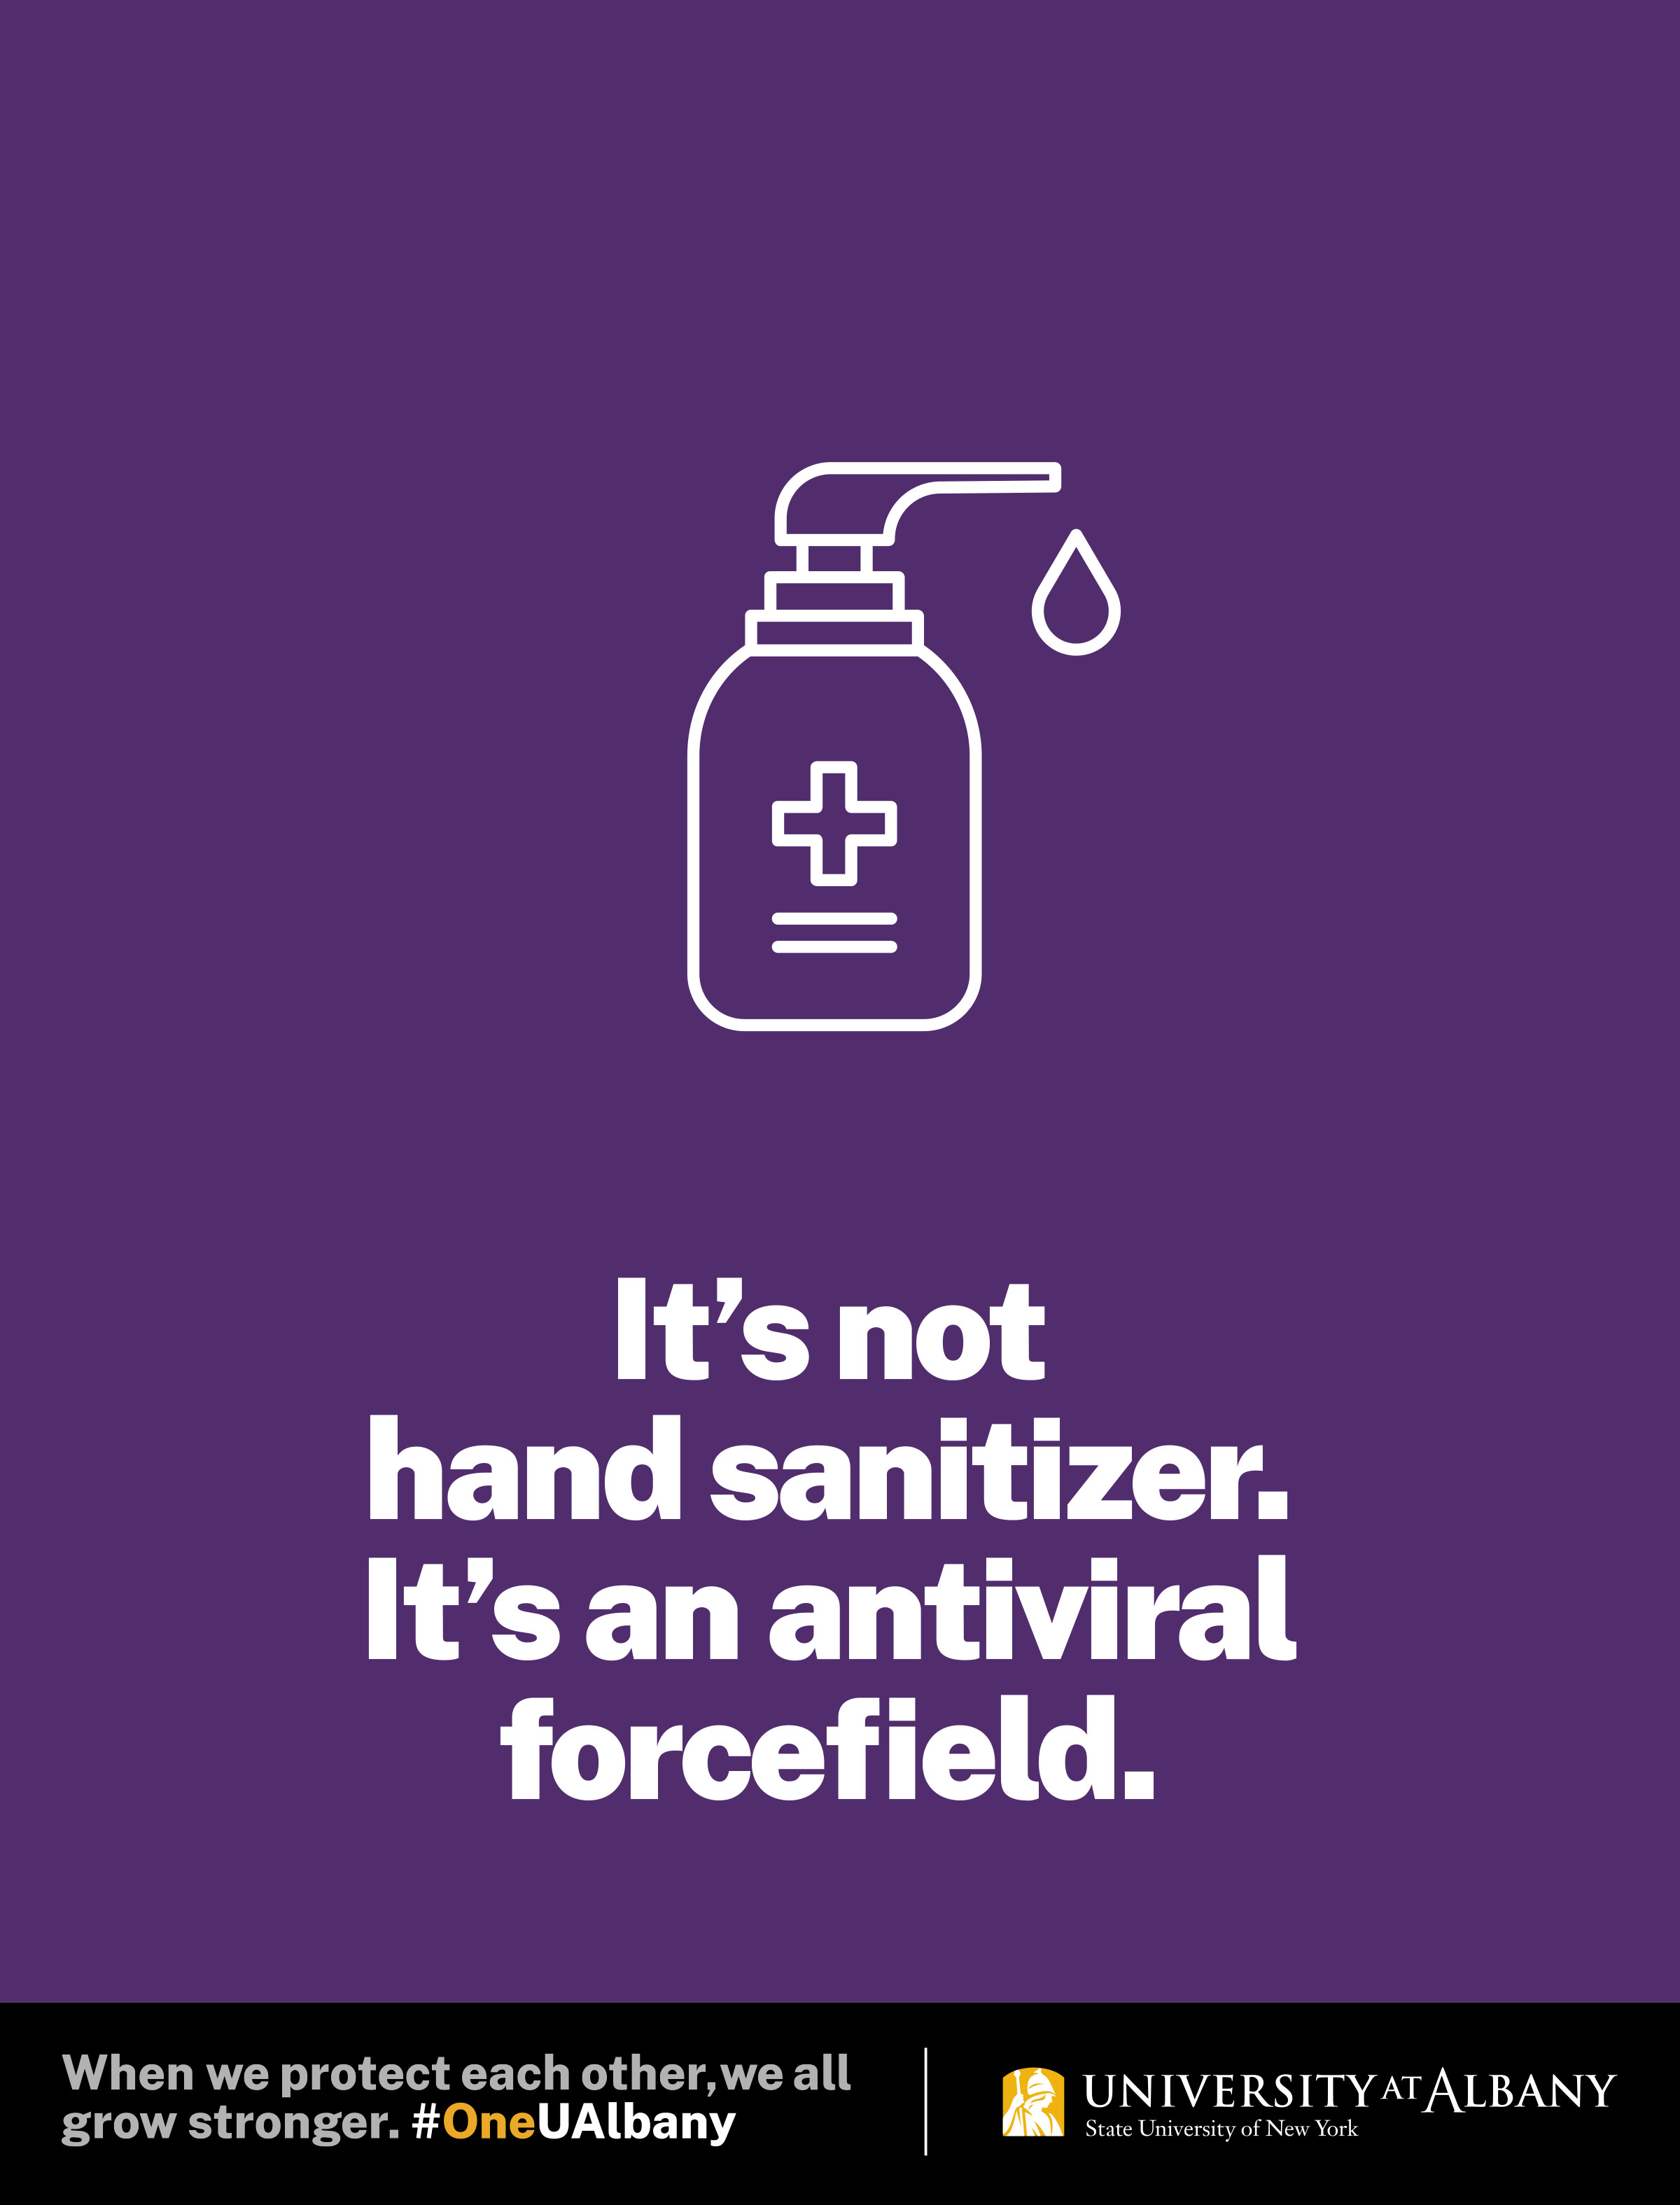 It’s not hand sanitizer. It’s an antiviral forcefield.